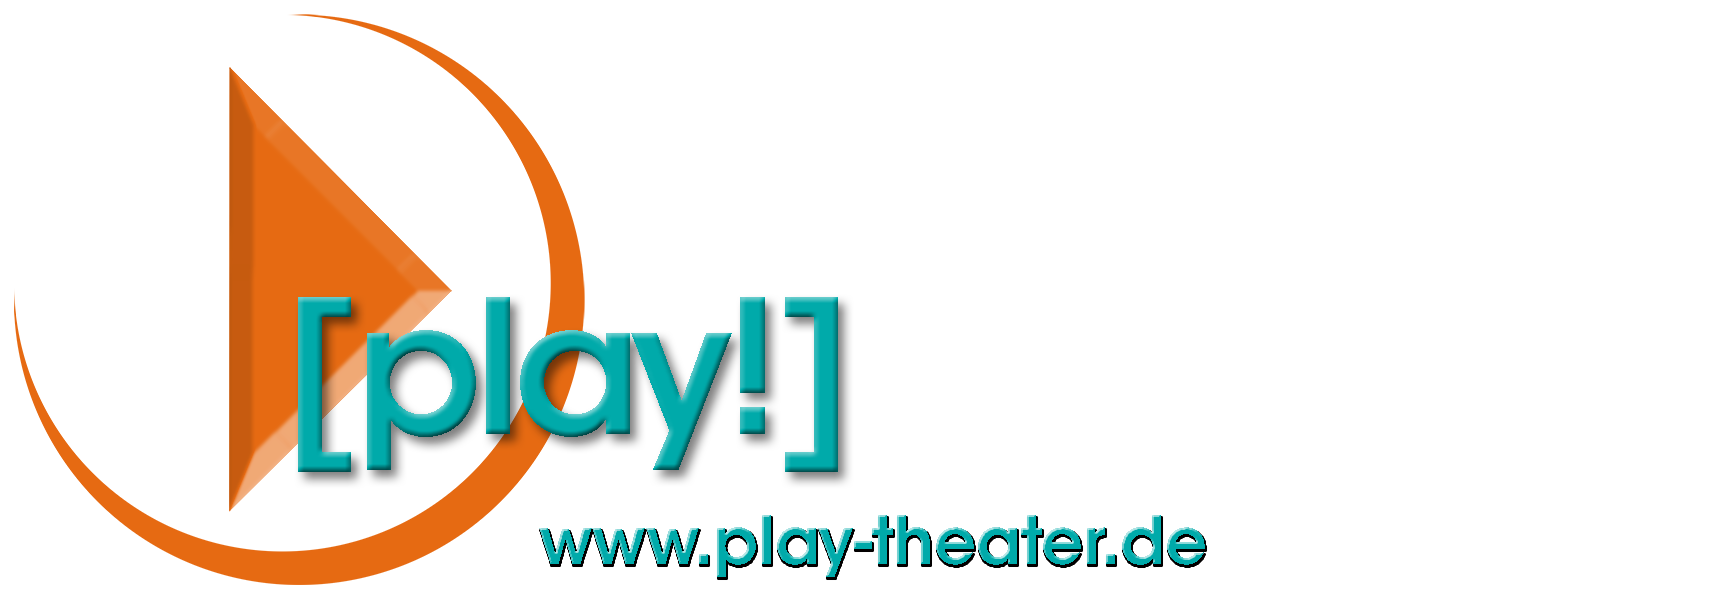 [play!] Theater